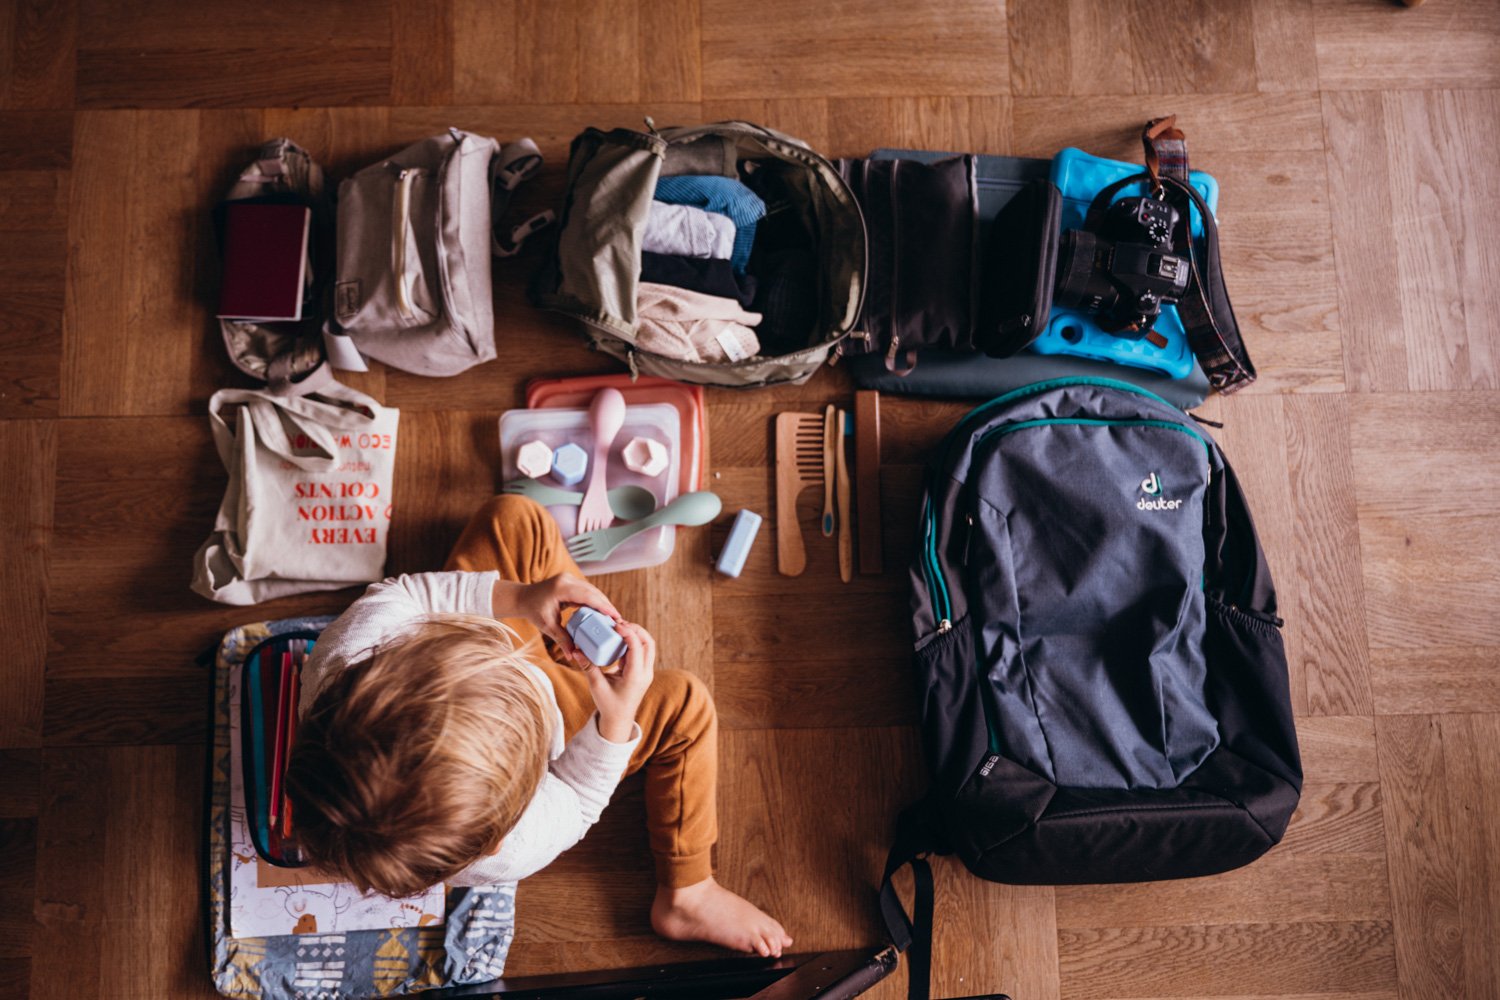 What to pack for a toddler on a plane: Your packing list for flying with a  toddler - The Travel Hack